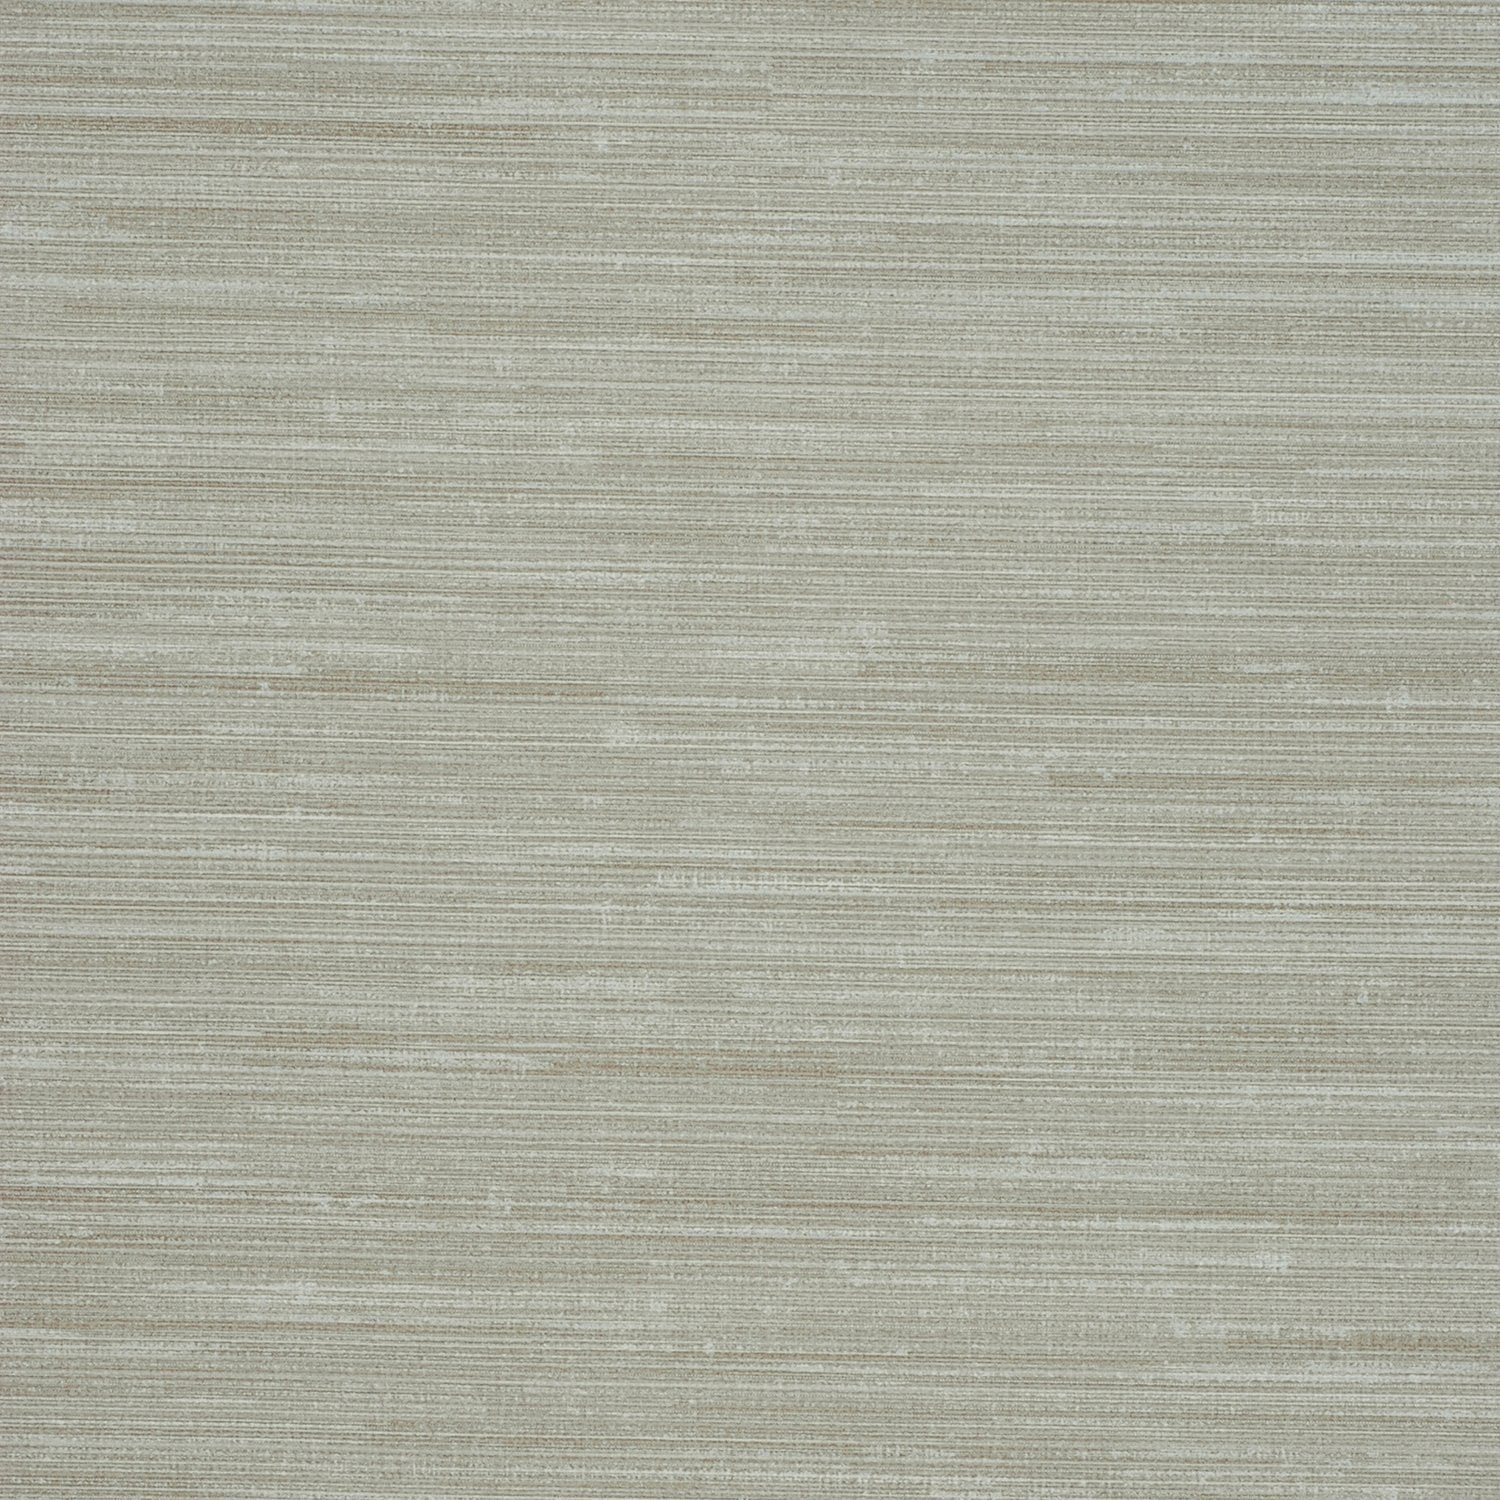 Casbah Silk - Y46480 - Wallcovering - Vycon - Kube Contract